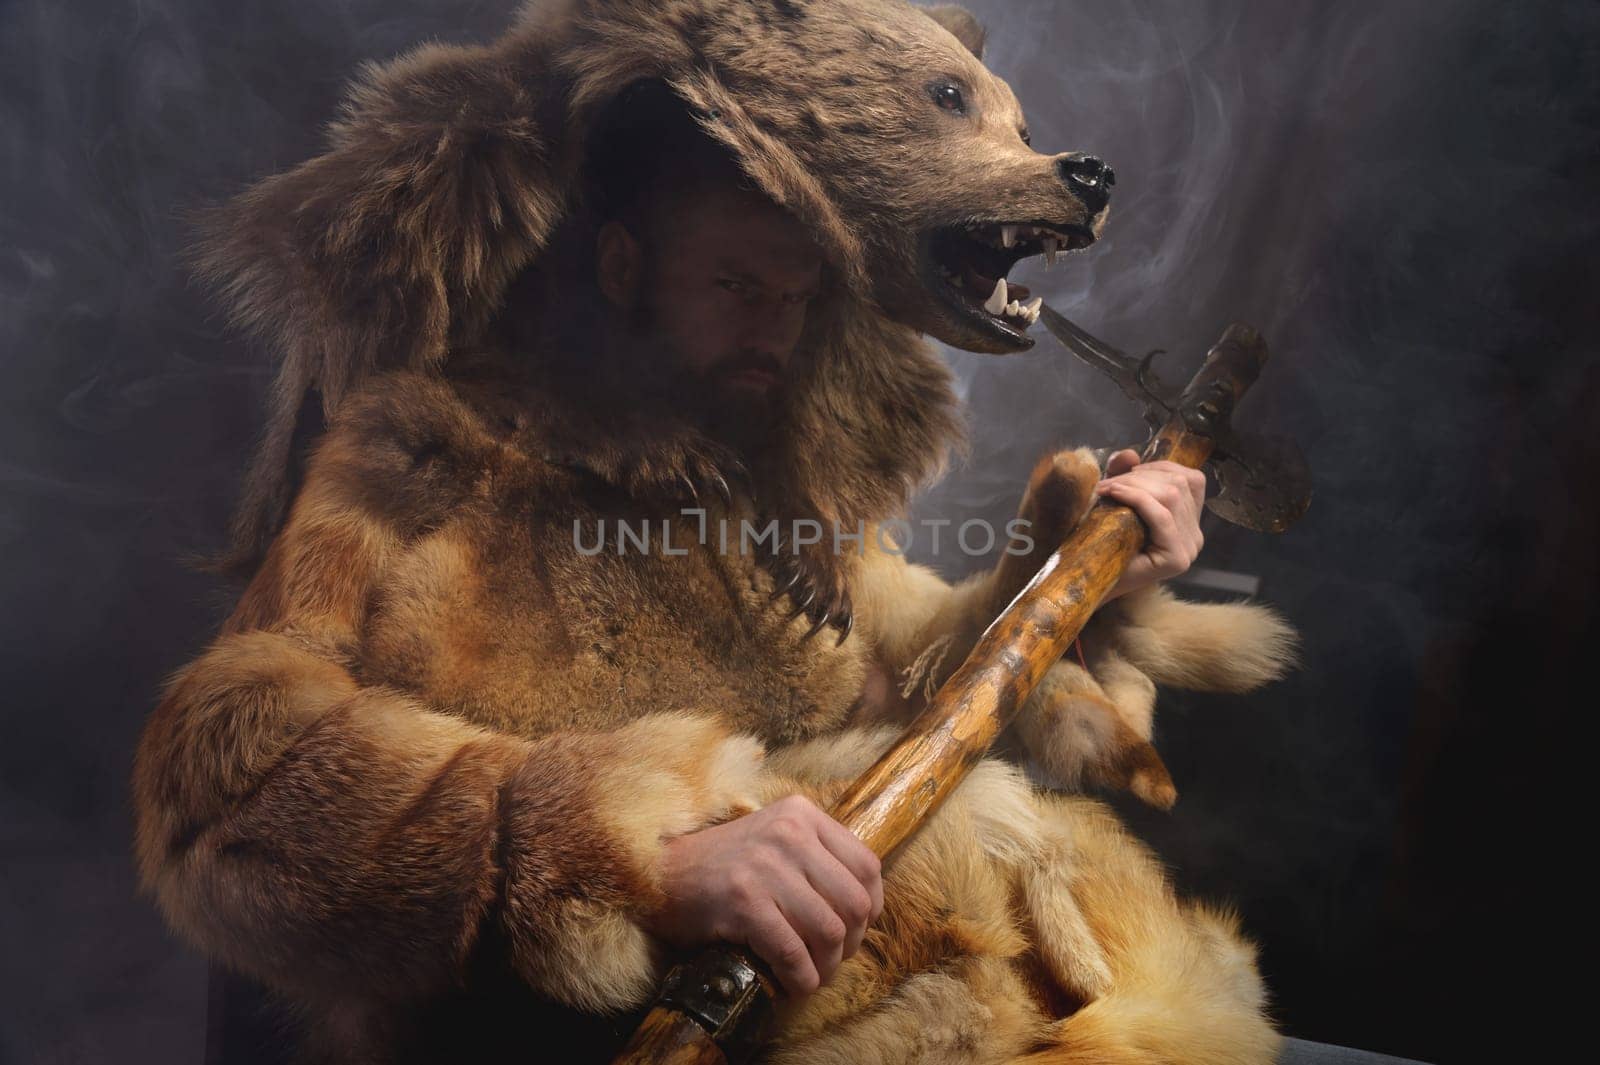 A man with a bear's head, clothes made from the skin of an animal. Warrior cosplay costume.